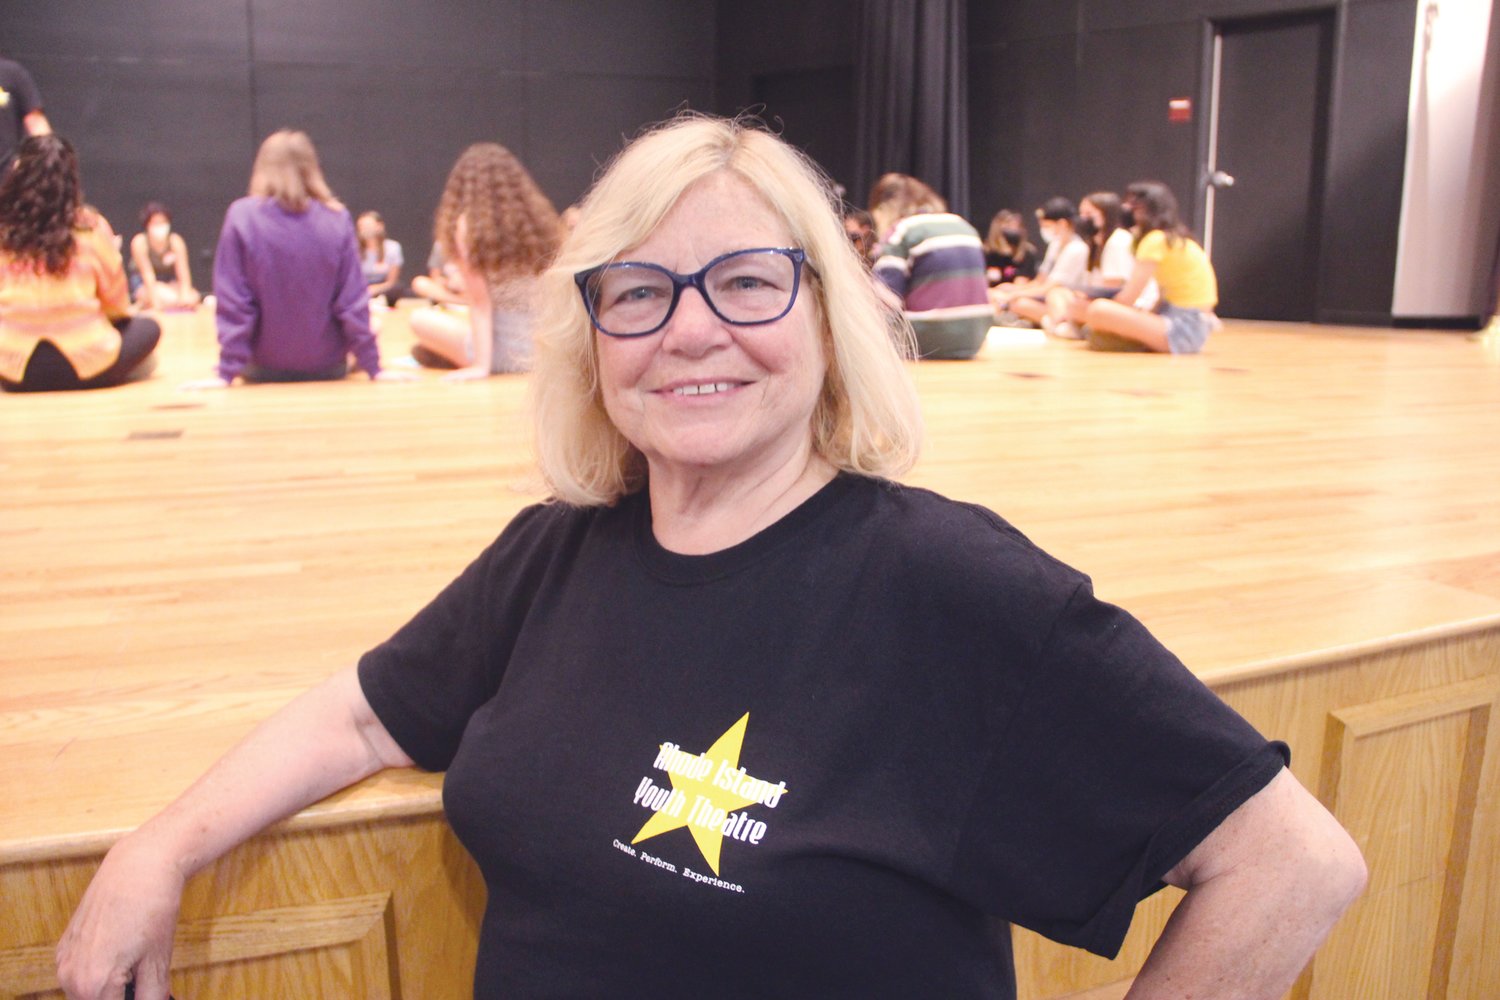 SHE DOESN’T PLAN TO RETIRE : Ann O’Grady, who started the Rhode Island Youth Theatre 34 years ago, is back in action on Aug. 13 at 7 p.m. and ready to open the curtains one more time.